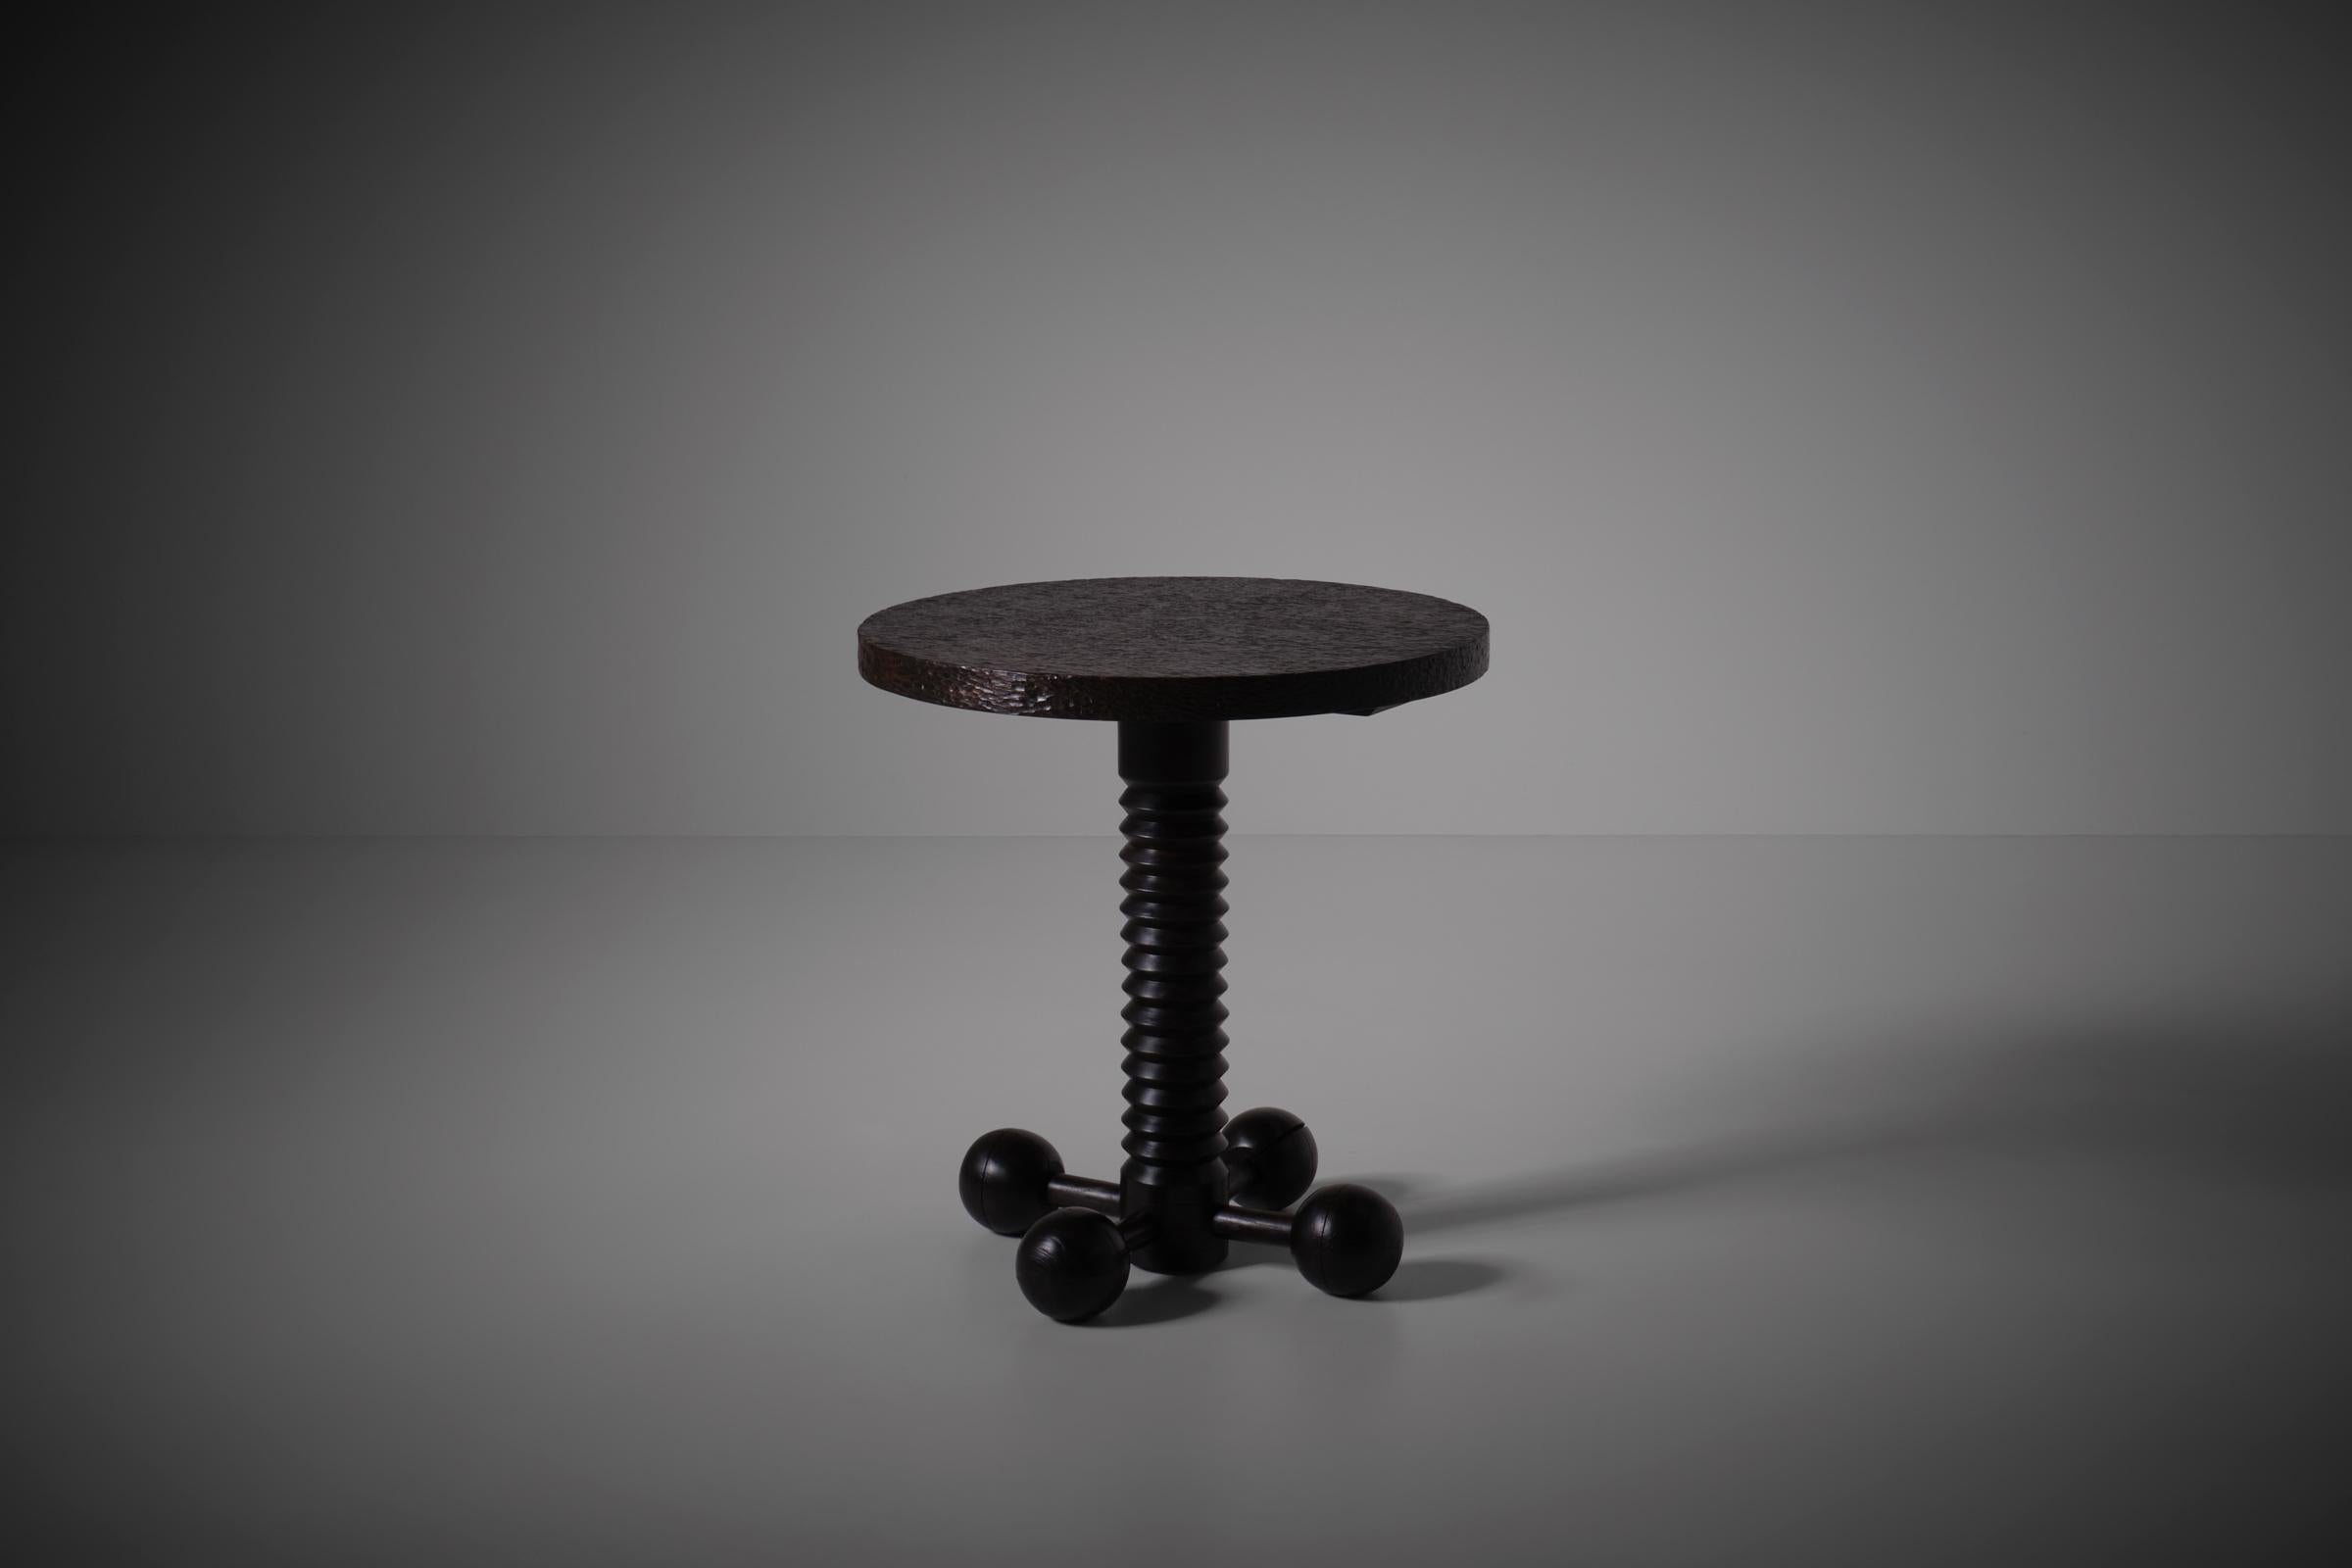 Sculptural wooden bistro table in solid Oak, France 1940s. The hand-carved dark stained round table top rests on a beautiful detailed base constructed out of a screw shaped center column with four nice contrasting ball feet. The variation in form,